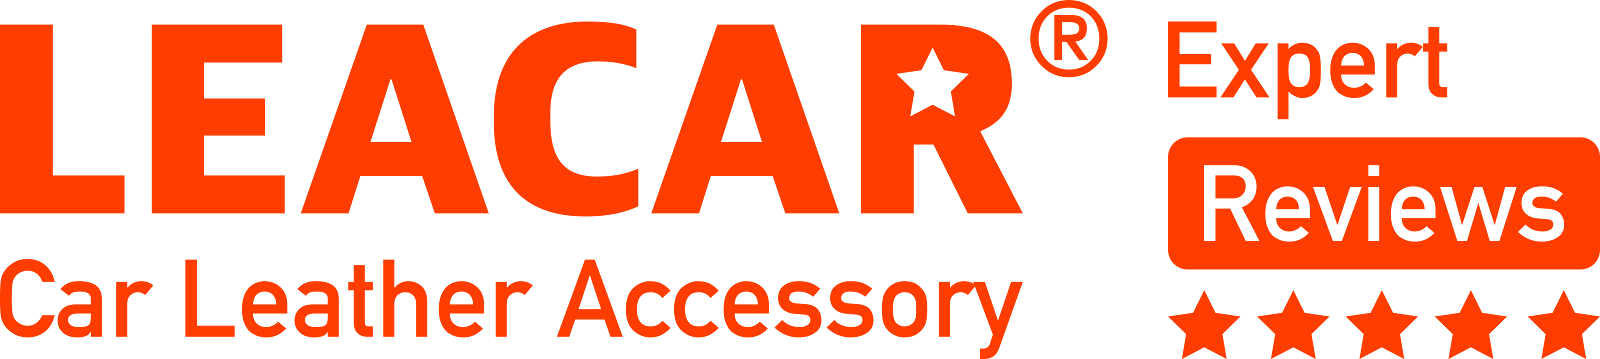 LeaCar: Expert Reviews on Genuine Leather Car Accessories